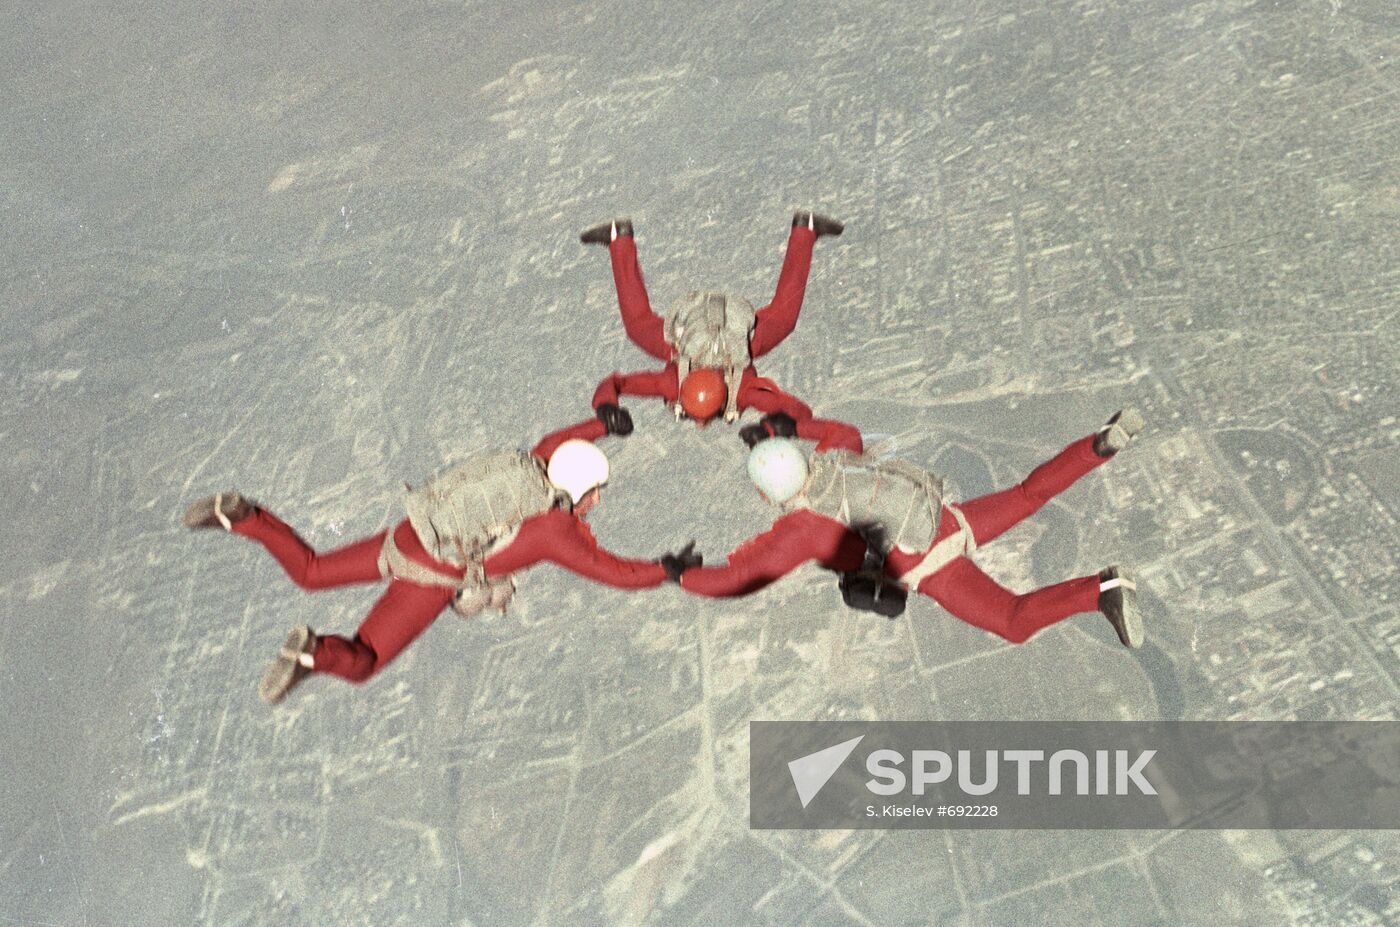 Skydivers perform figure in the sky